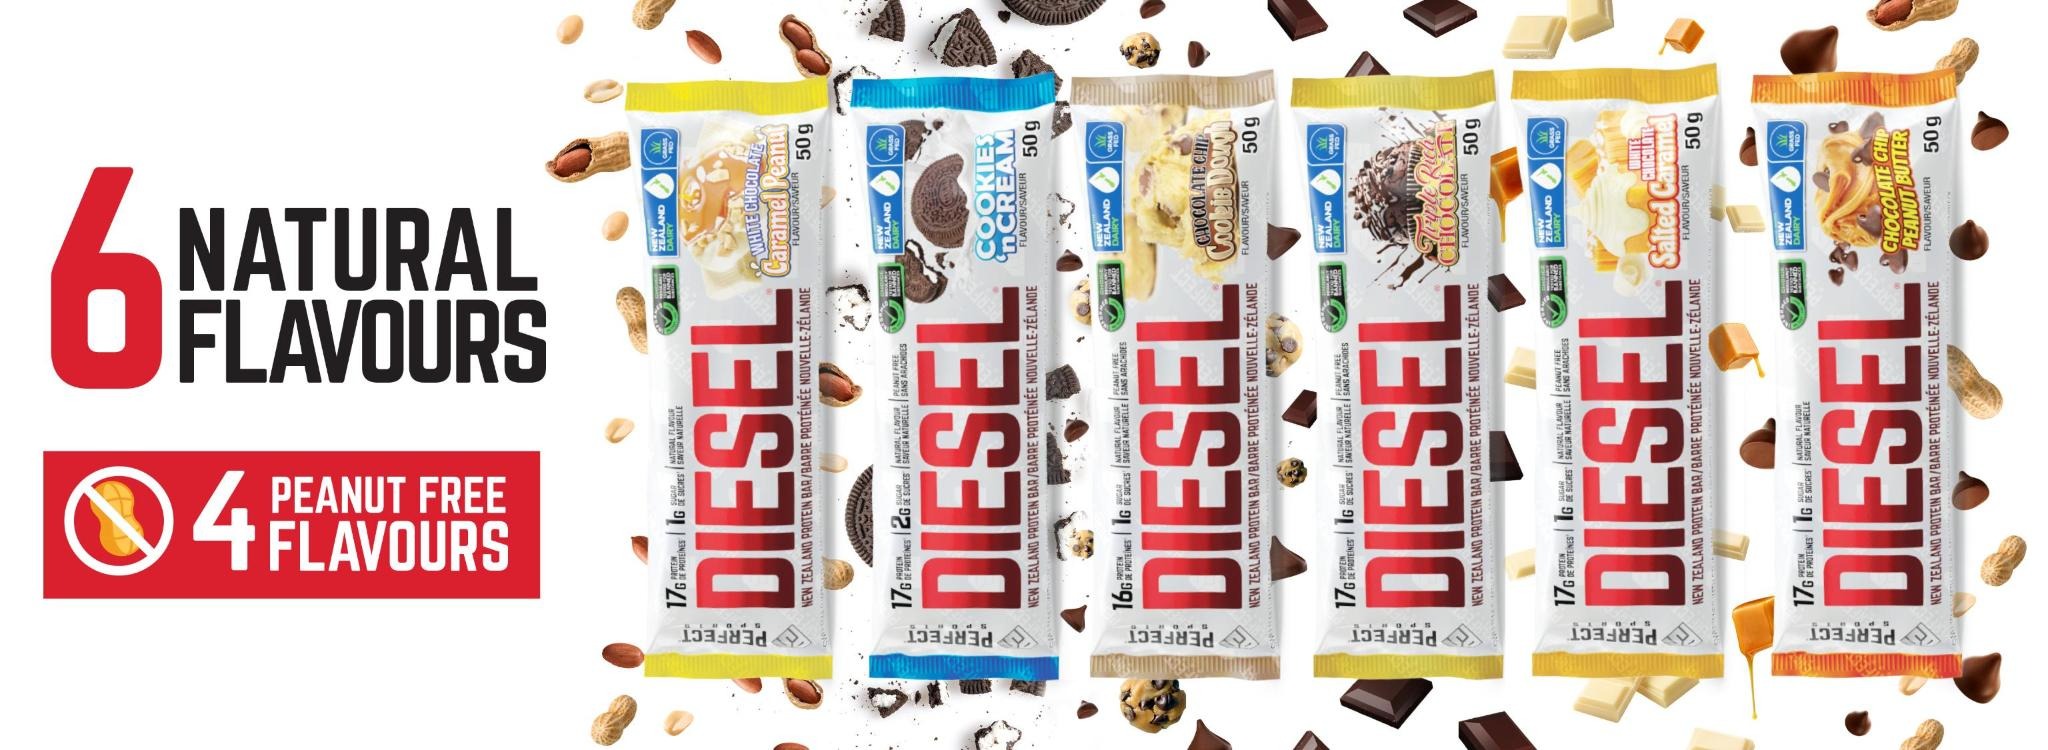 DIESEL New Zealand Whey Protein Bars Flavours